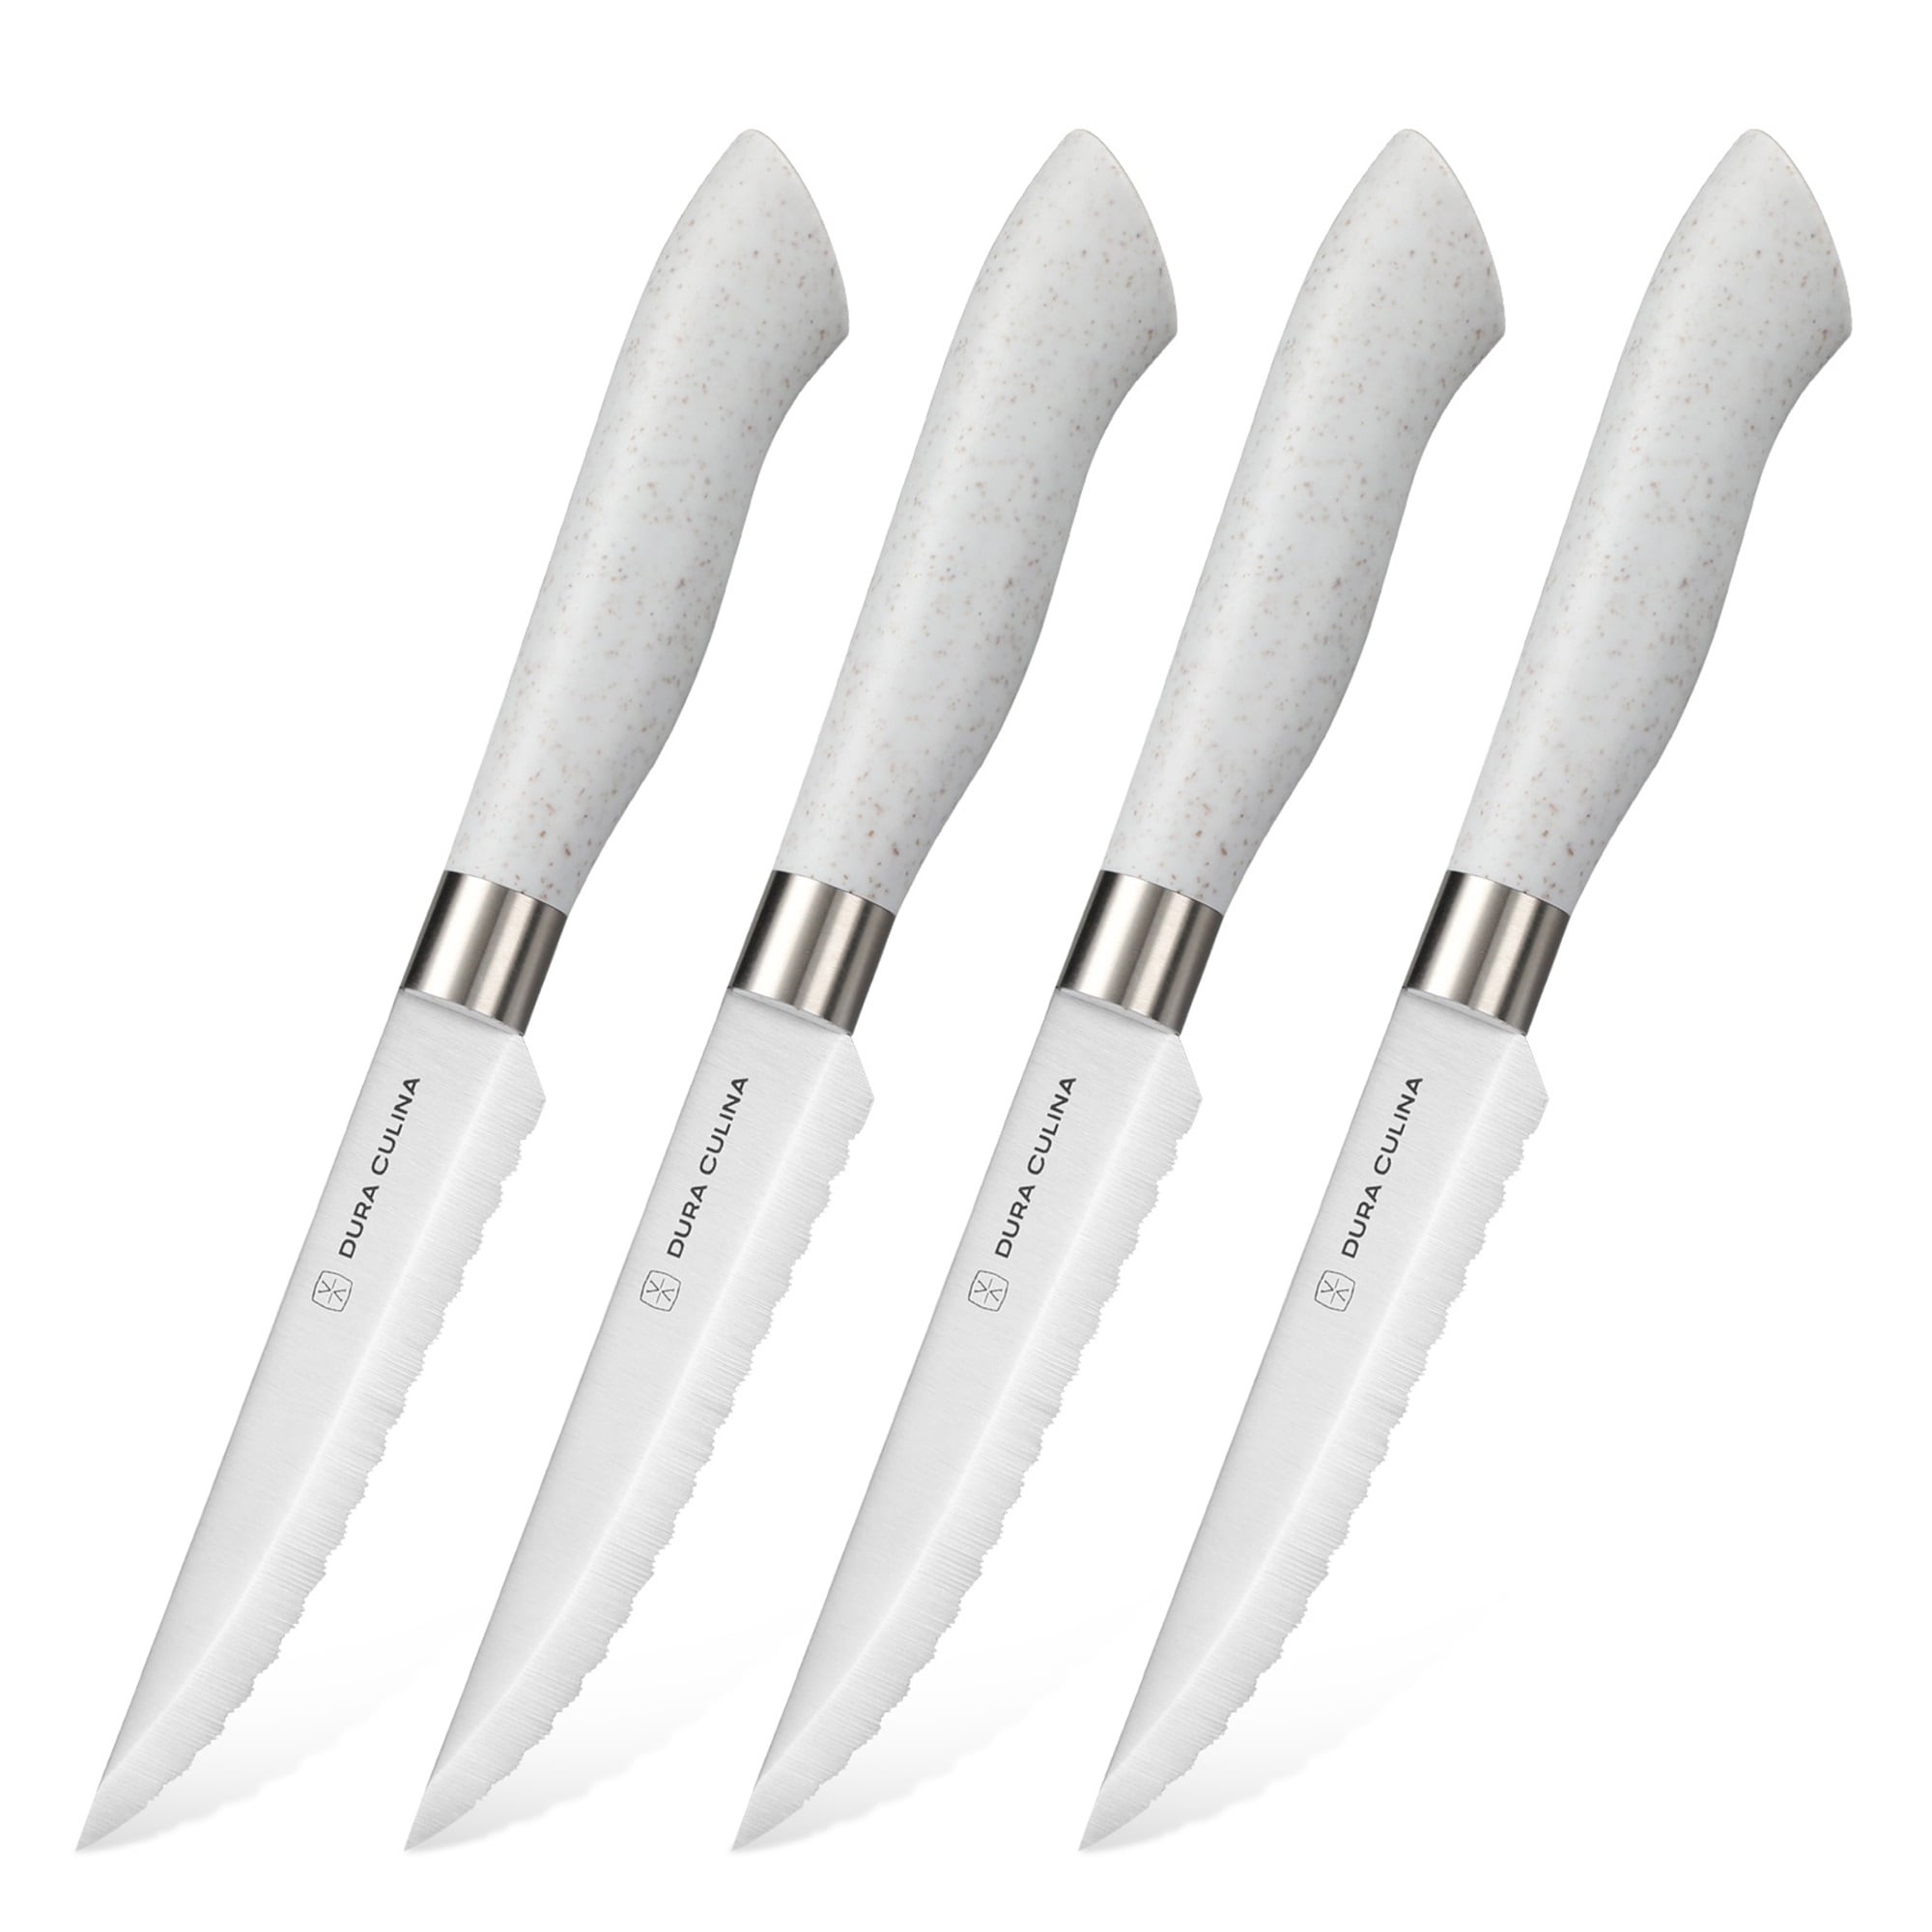 https://ak1.ostkcdn.com/images/products/is/images/direct/bb3ceab8519249840c9d9bbf24993f1f83e2df1d/DURA-LIVING-EcoCut-Set-of-4-Steak-Knives---High-Carbon-Micro-Serrated-Stainless-Steel%2C-Sustainable-Eco-Friendly-Handle-steak-set.jpg